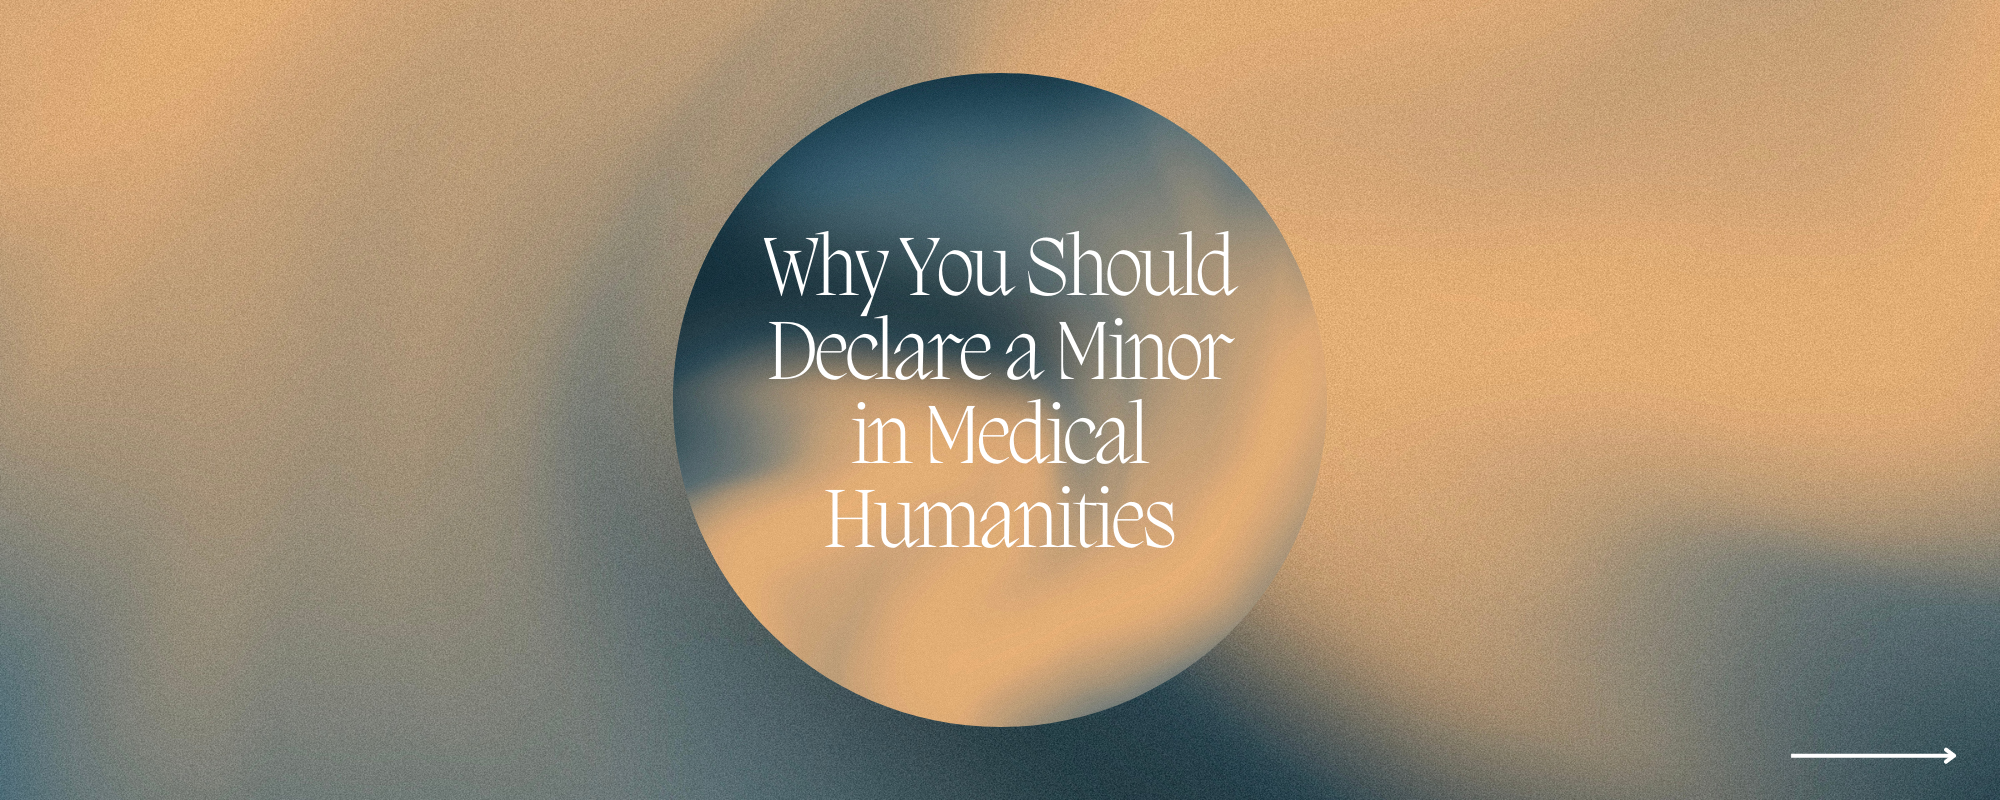 Text reads "Why You Should Declare a Minor in Medical Humanities" against a blue and gold background